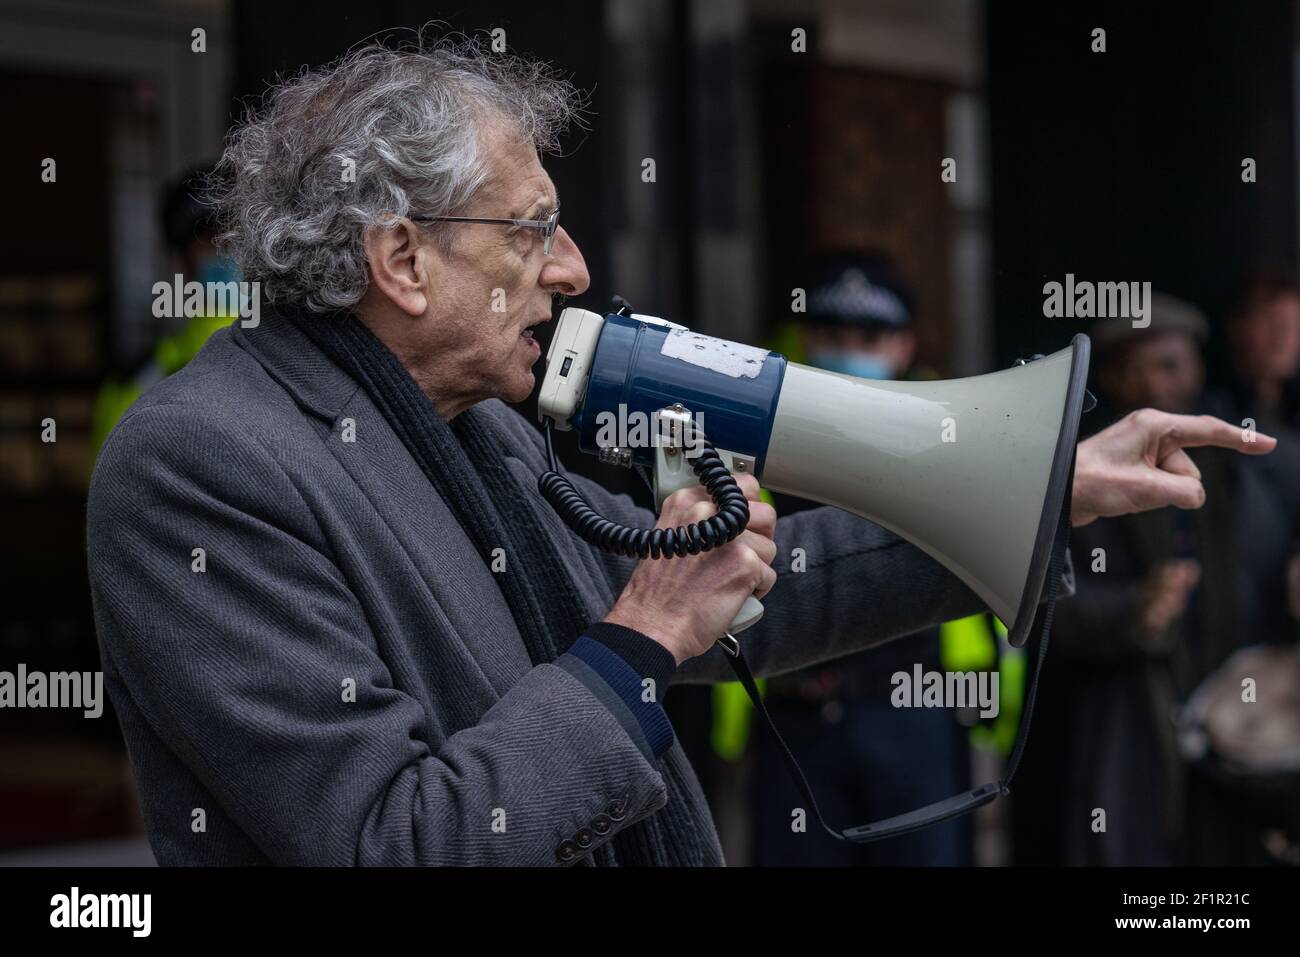 Coronavirus: Piers Corbyn attends an attempted anti-lockdown event of 20-30 protesters on Richmond Green in south east London, UK. Stock Photo